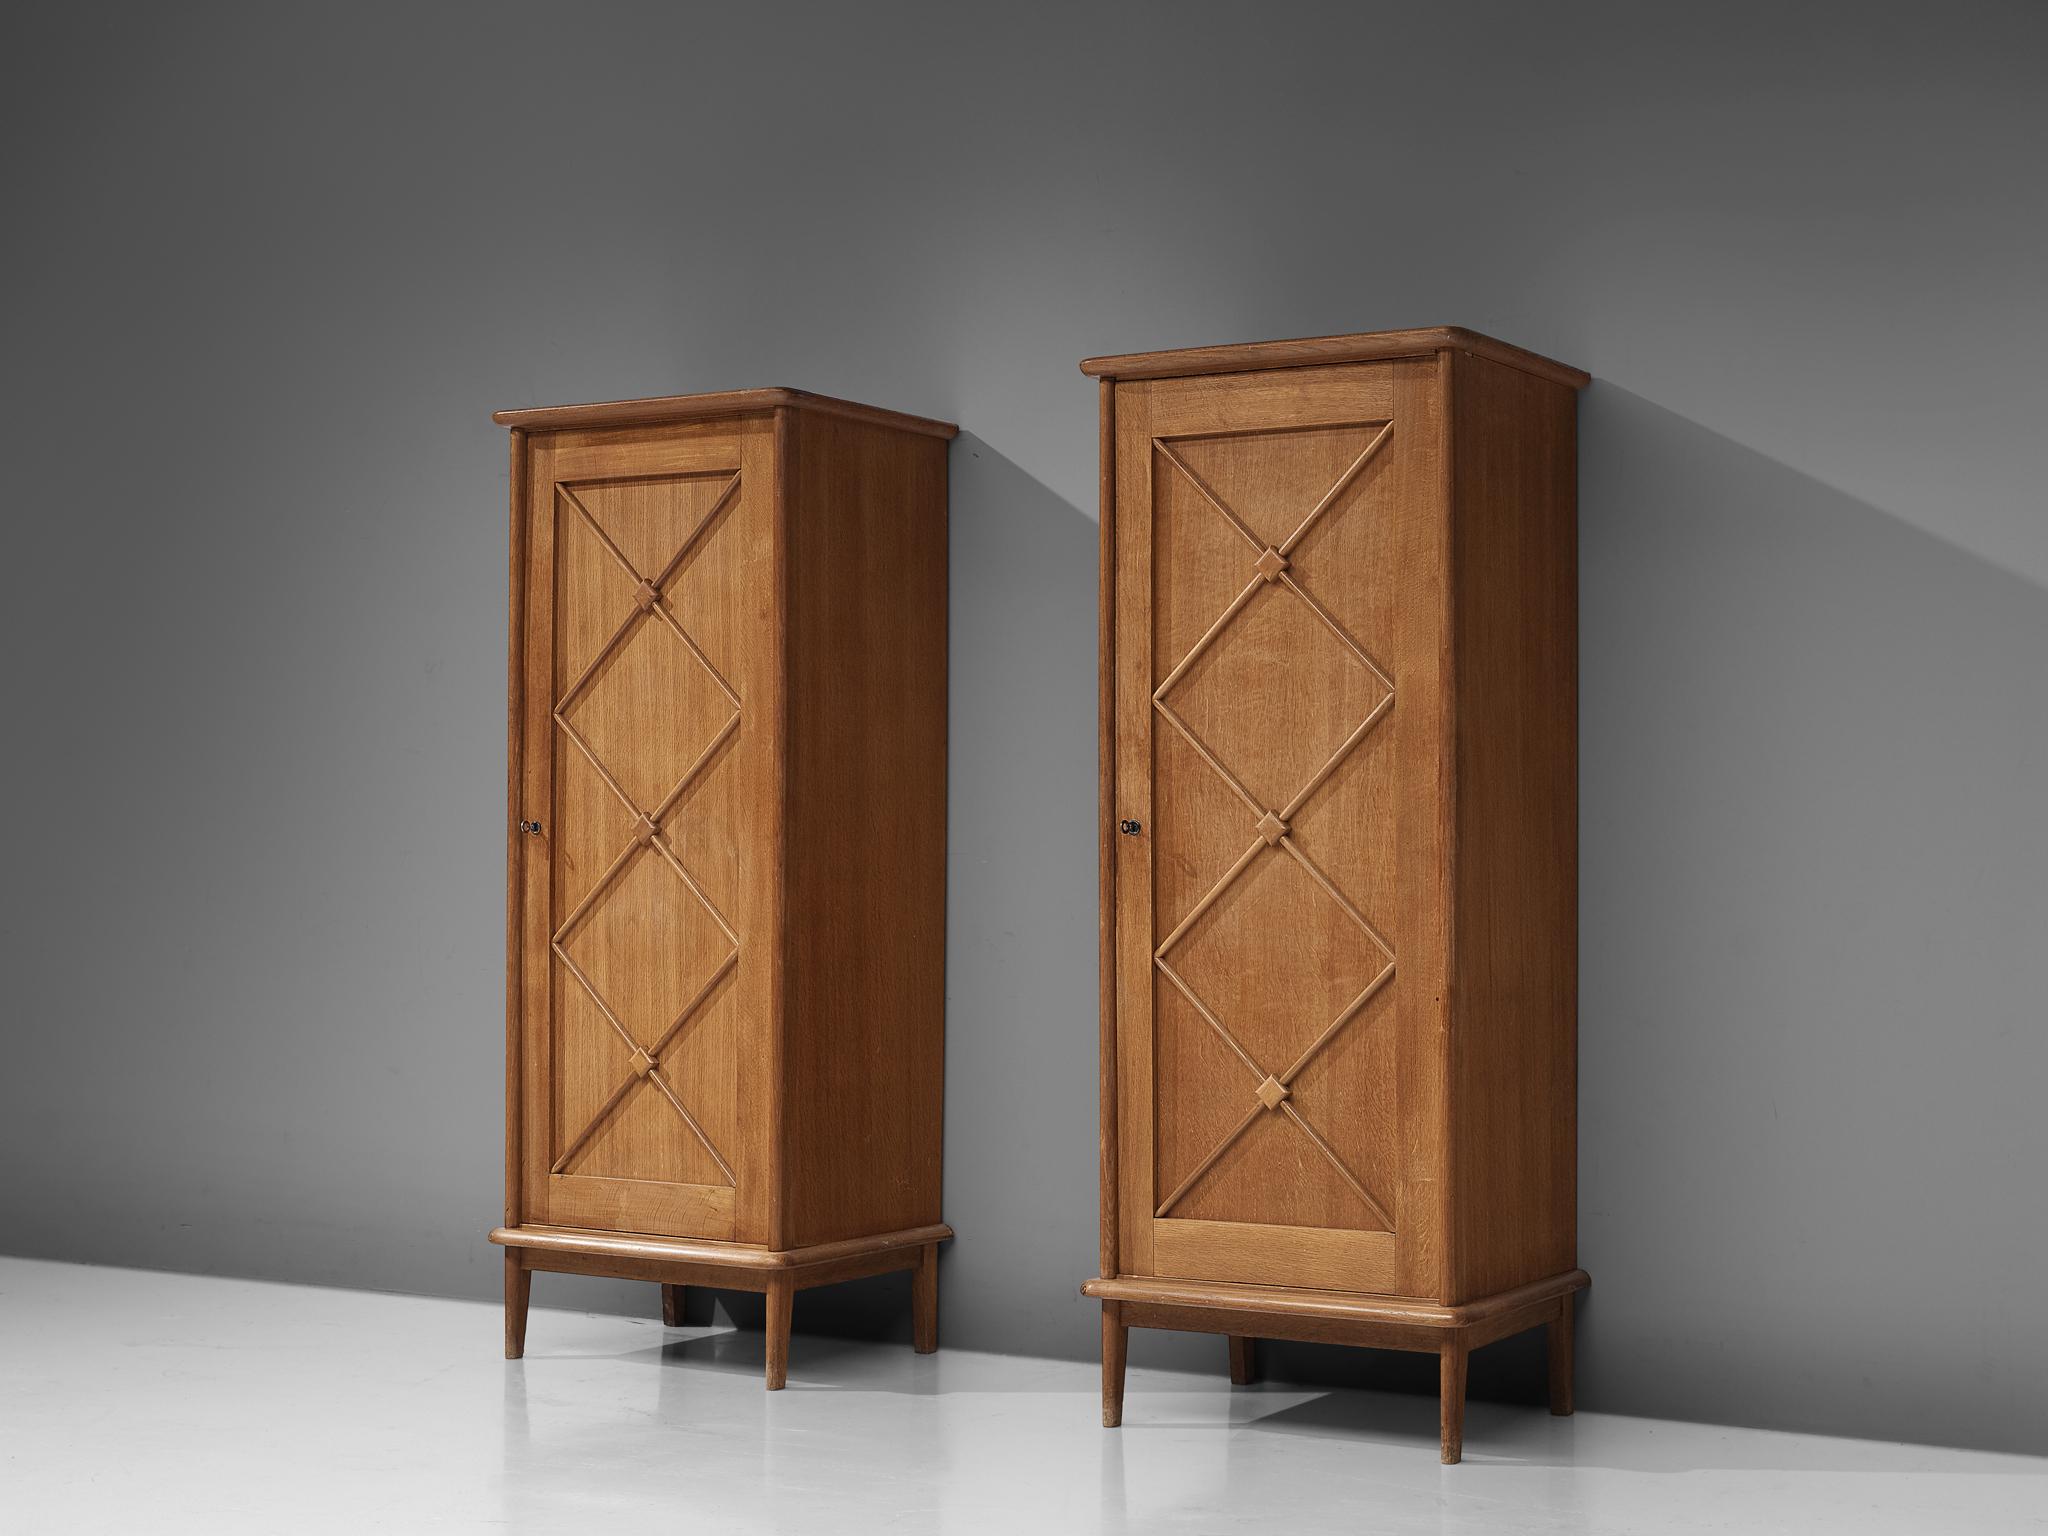 Pair of cabinets, oak, France, 1960s

Elegant case pieces in oak that features geometric details in the doors. The high board with one door is lifted from the ground by slim, conical legs that give the solid looking body a more airy appearance. The